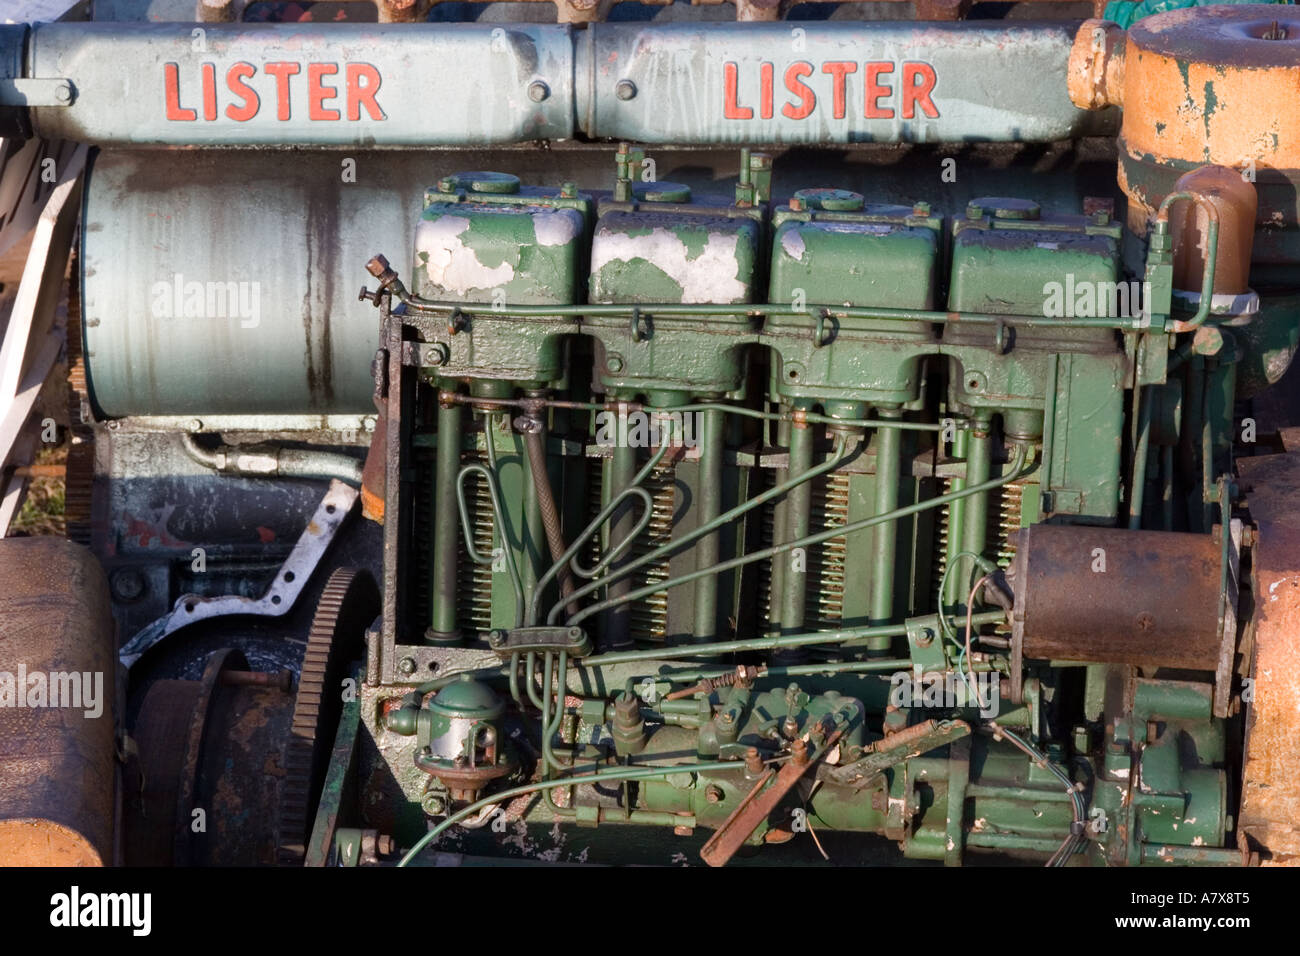 An old Lister diesel engine Stock Photo - Alamy